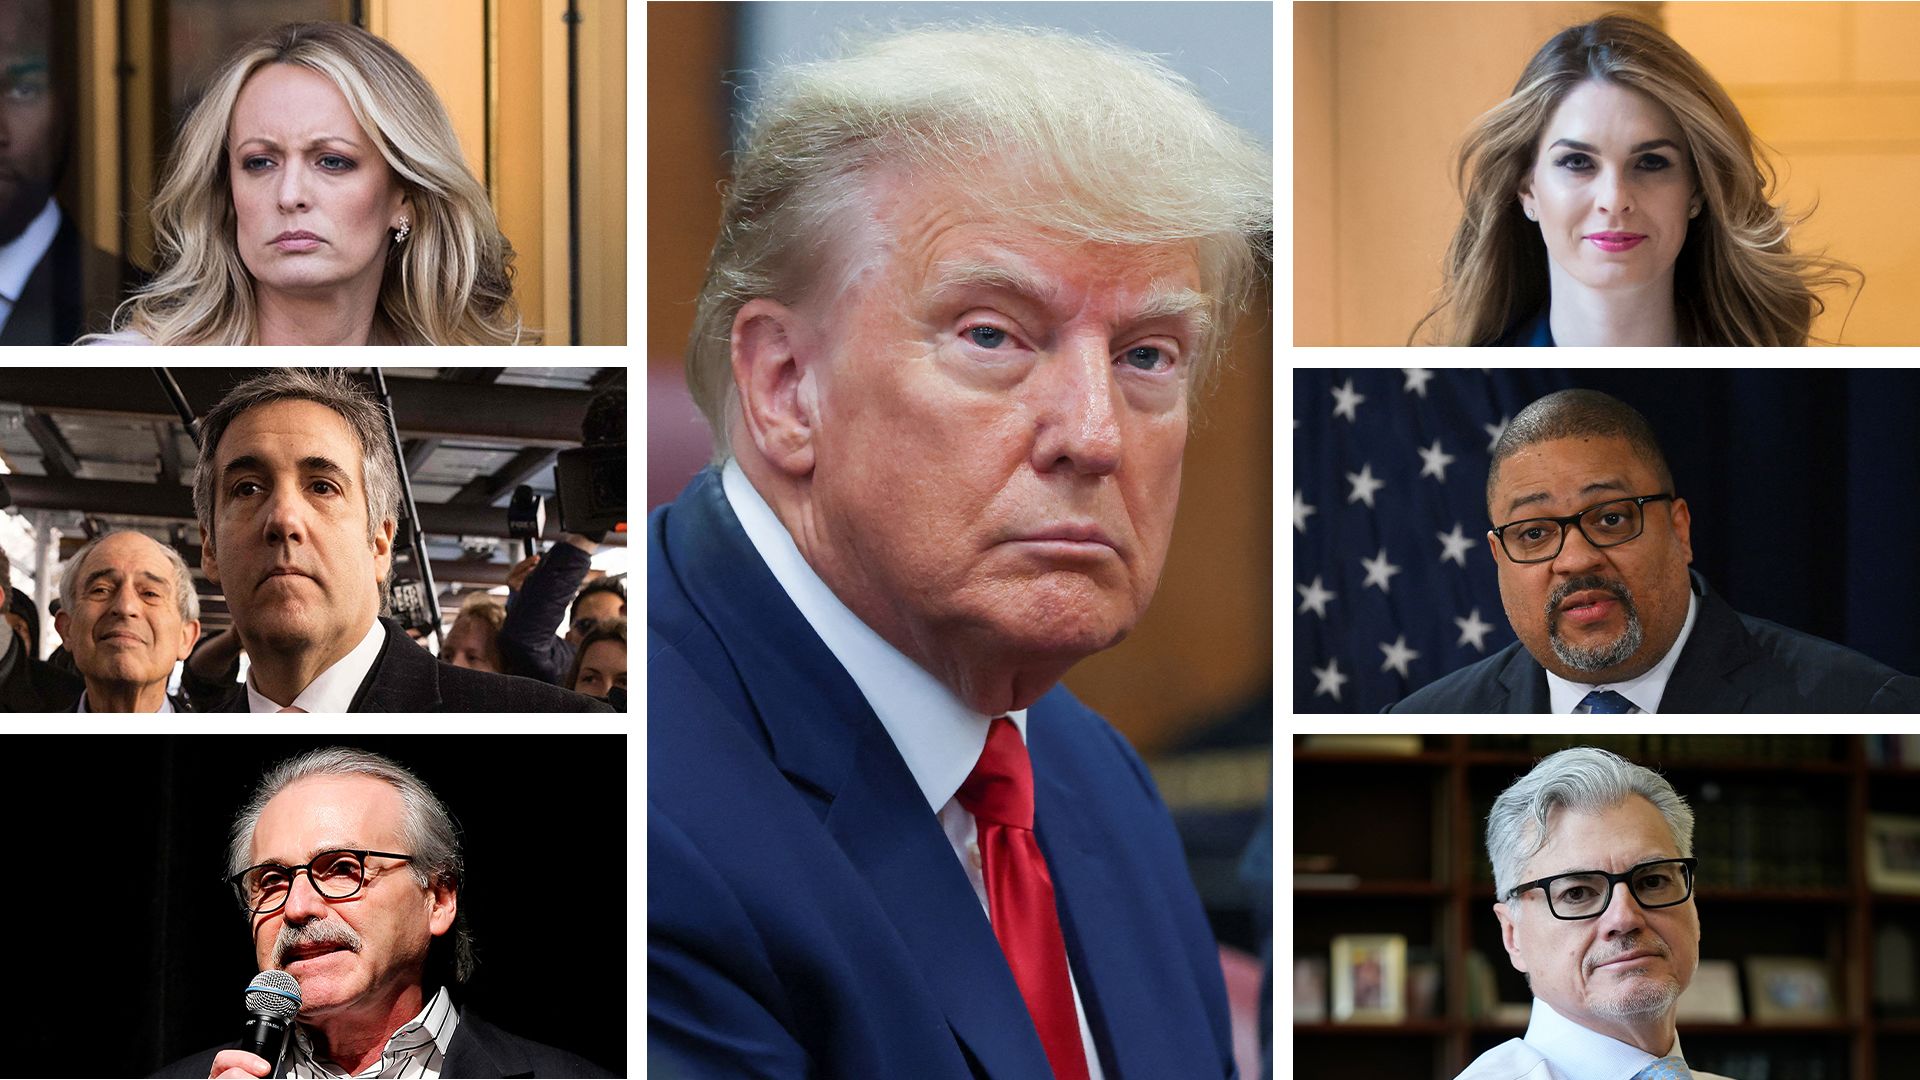 This composite image shows former President Donald Trump (center), Stormy Daniels (top left), Michael Cohen (middle left), David Pecker (bottom left), Hope Hicks (top right), Alvin Bragg (middle right) and Judge Juan Merchan (bottom right).